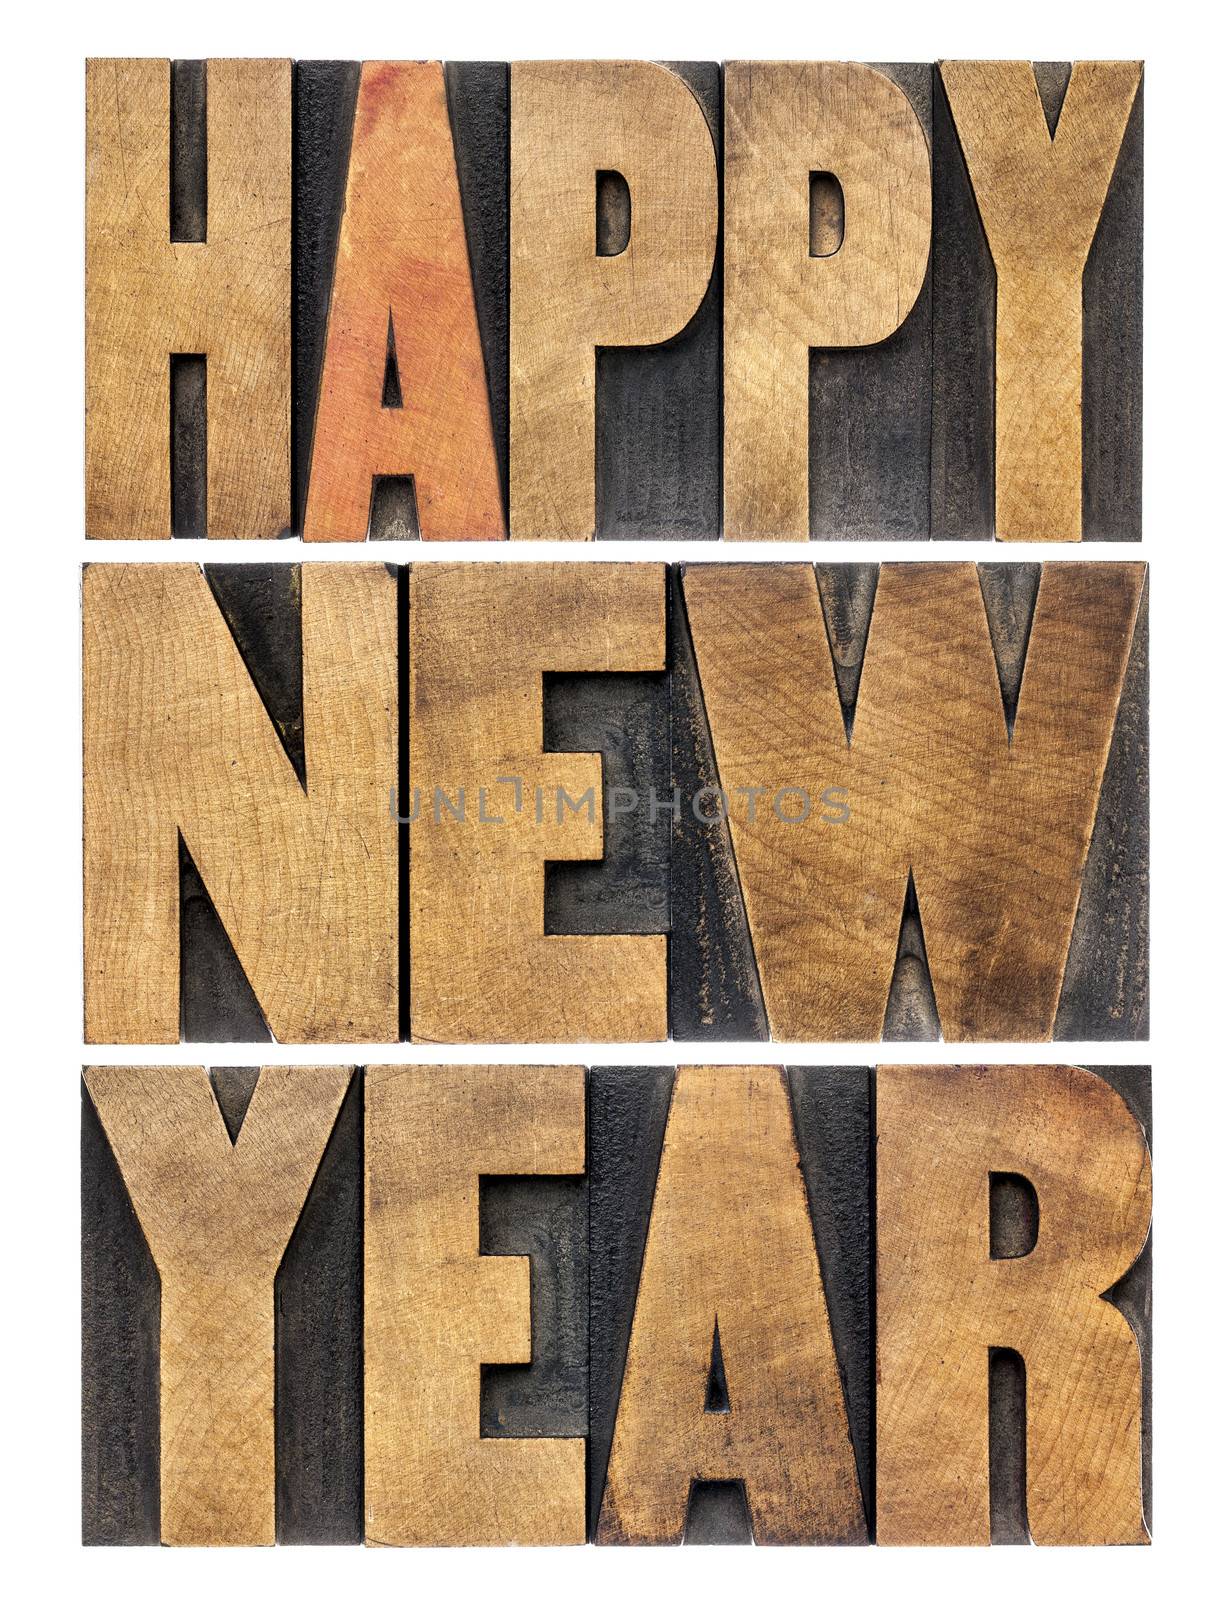 Happy New Year greetings or wishes - isolated text in vintage letterpress wood type blocks